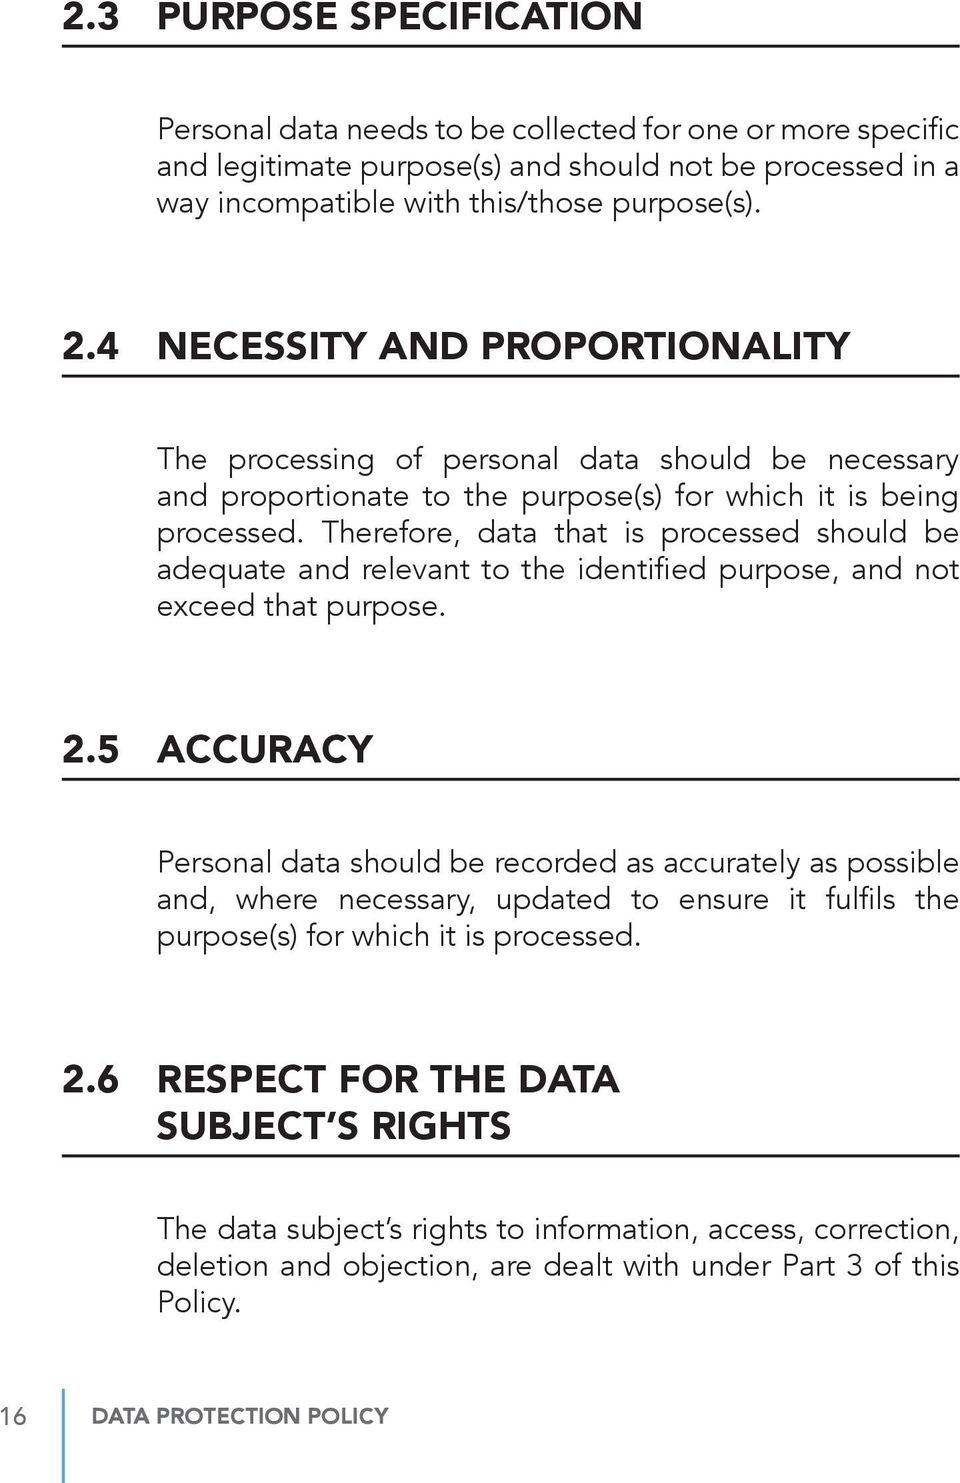 Therefore, data that is processed should be adequate and relevant to the identified purpose, and not exceed that purpose. 2.